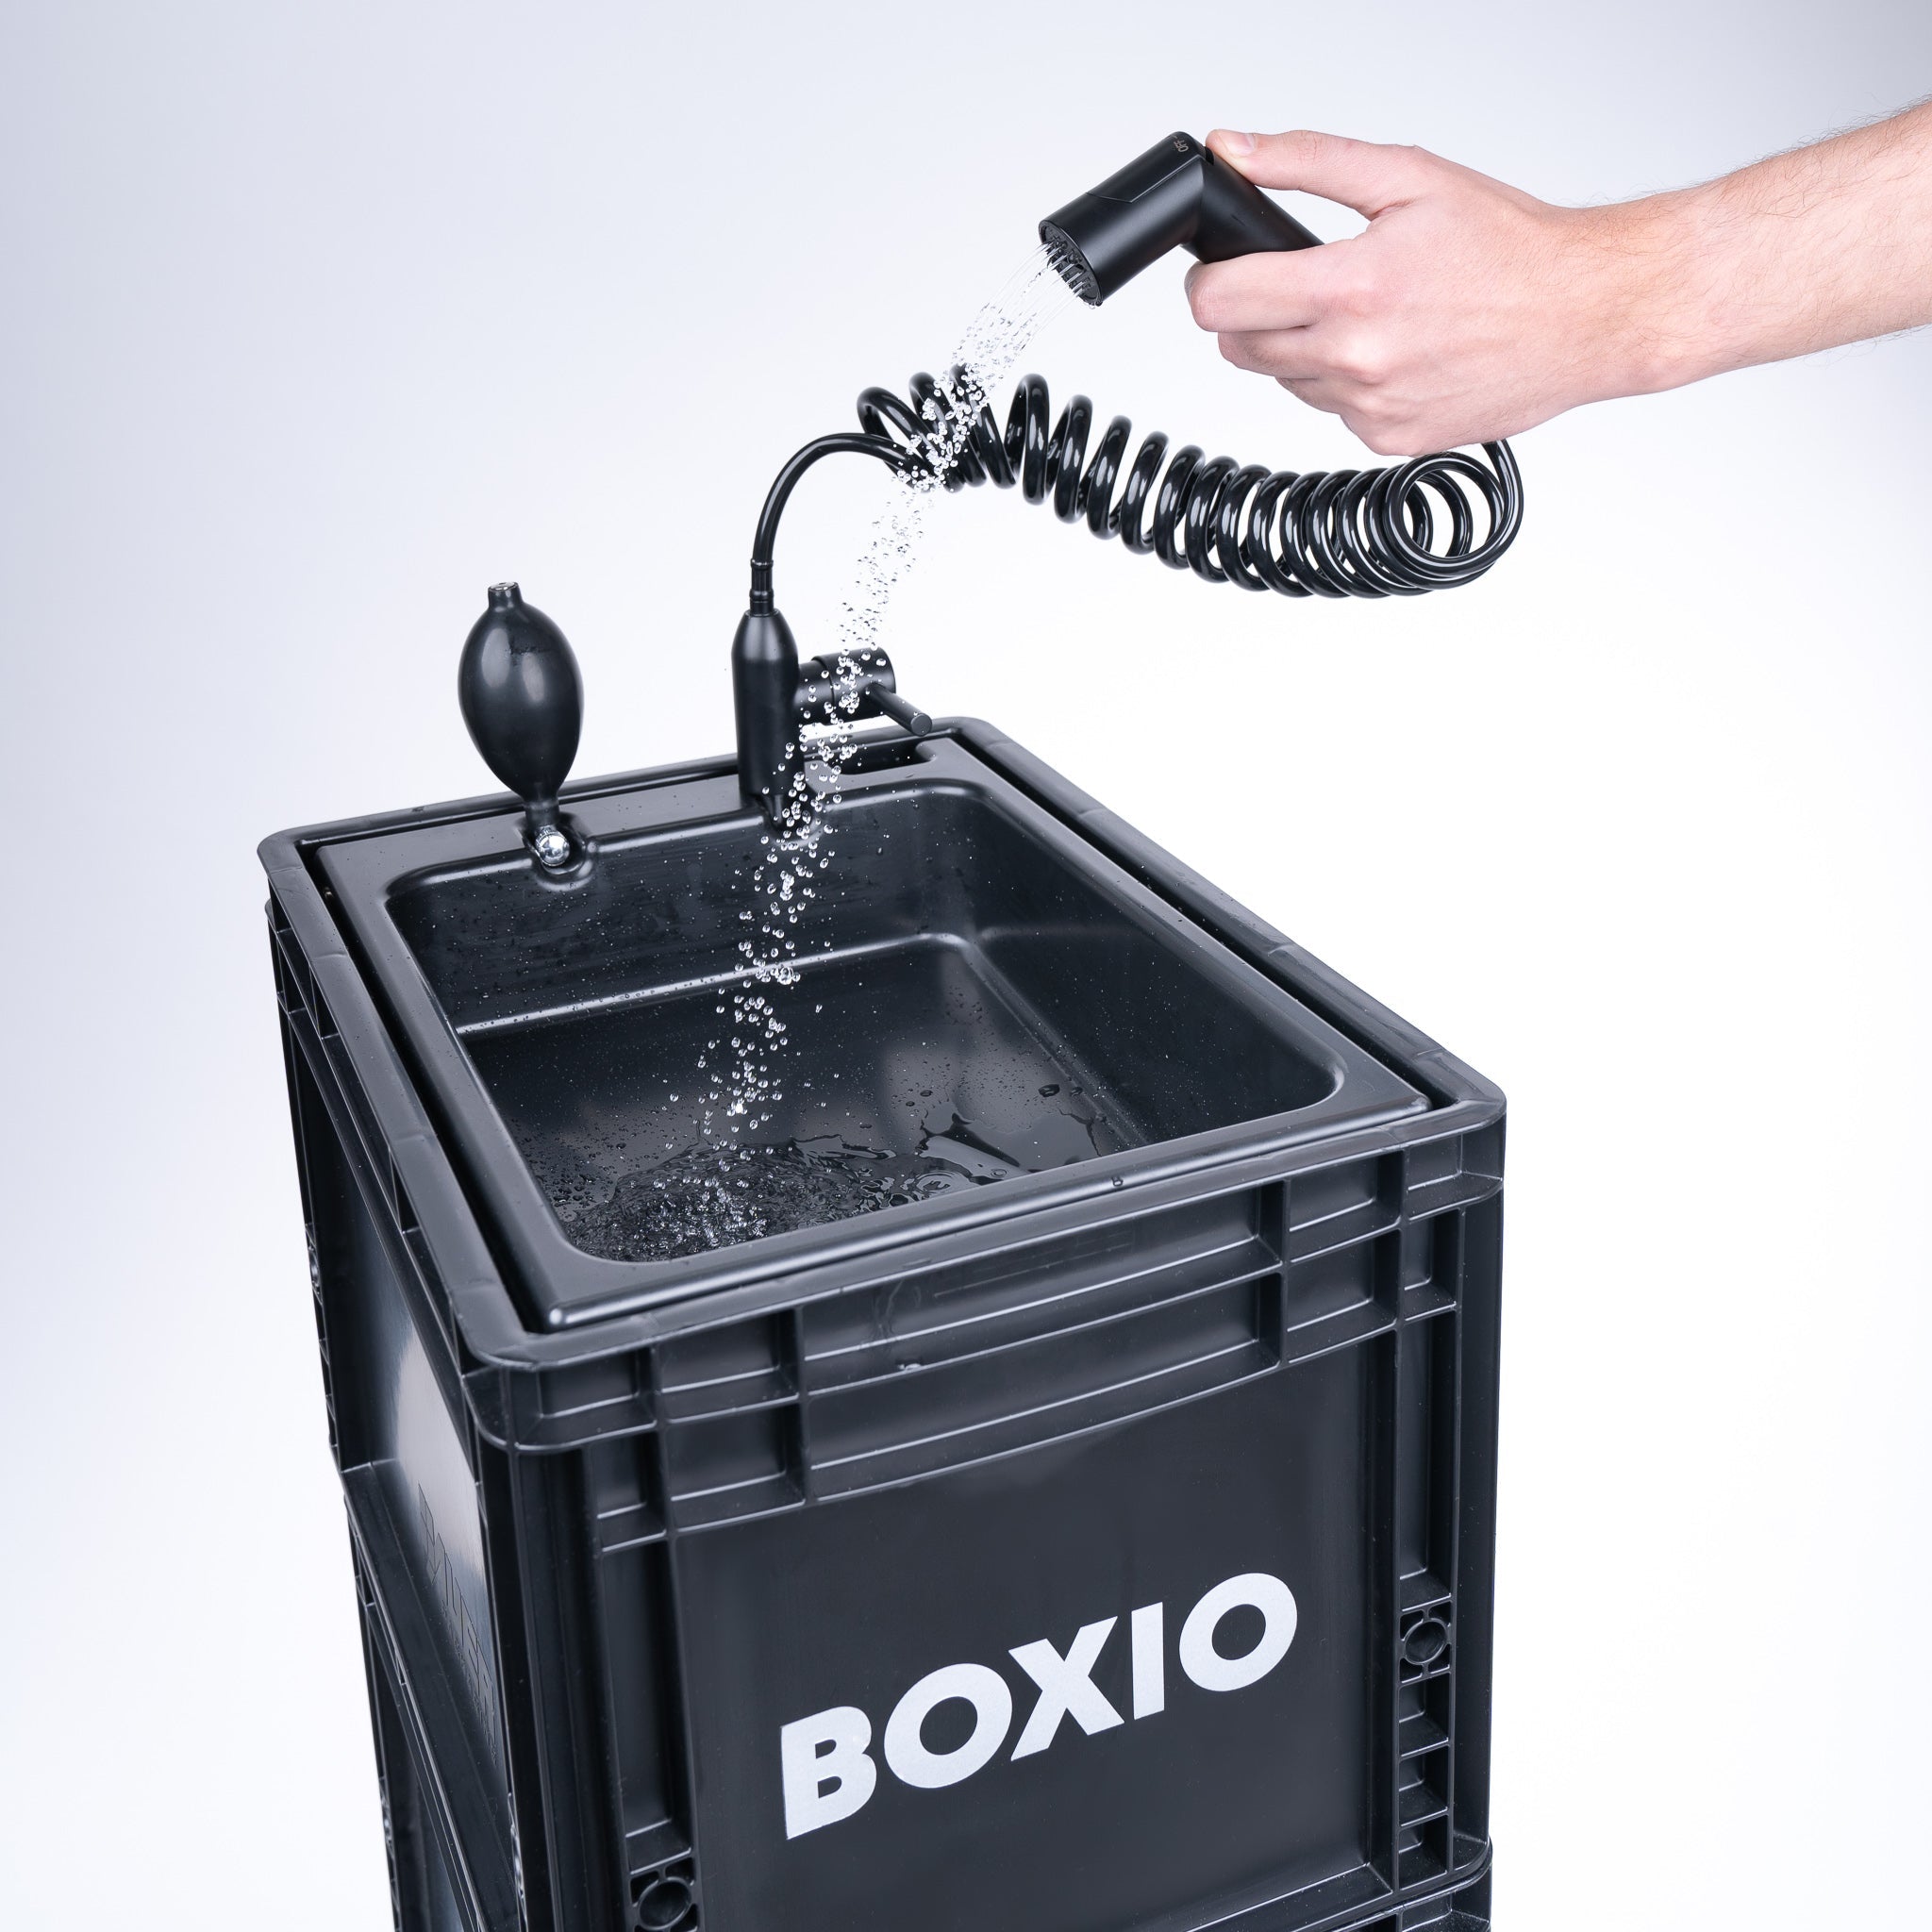 BOXIO - Wash: Portable Sink - Convenient Camping Sink Solution! 15,7 x  11,8 x 11 Compact with Unique Design, Separate Canister, Lightweight  Mobile Sink for Garden/Camping/Outdoor Events/Gatherings/Worksite/RV/Indoor